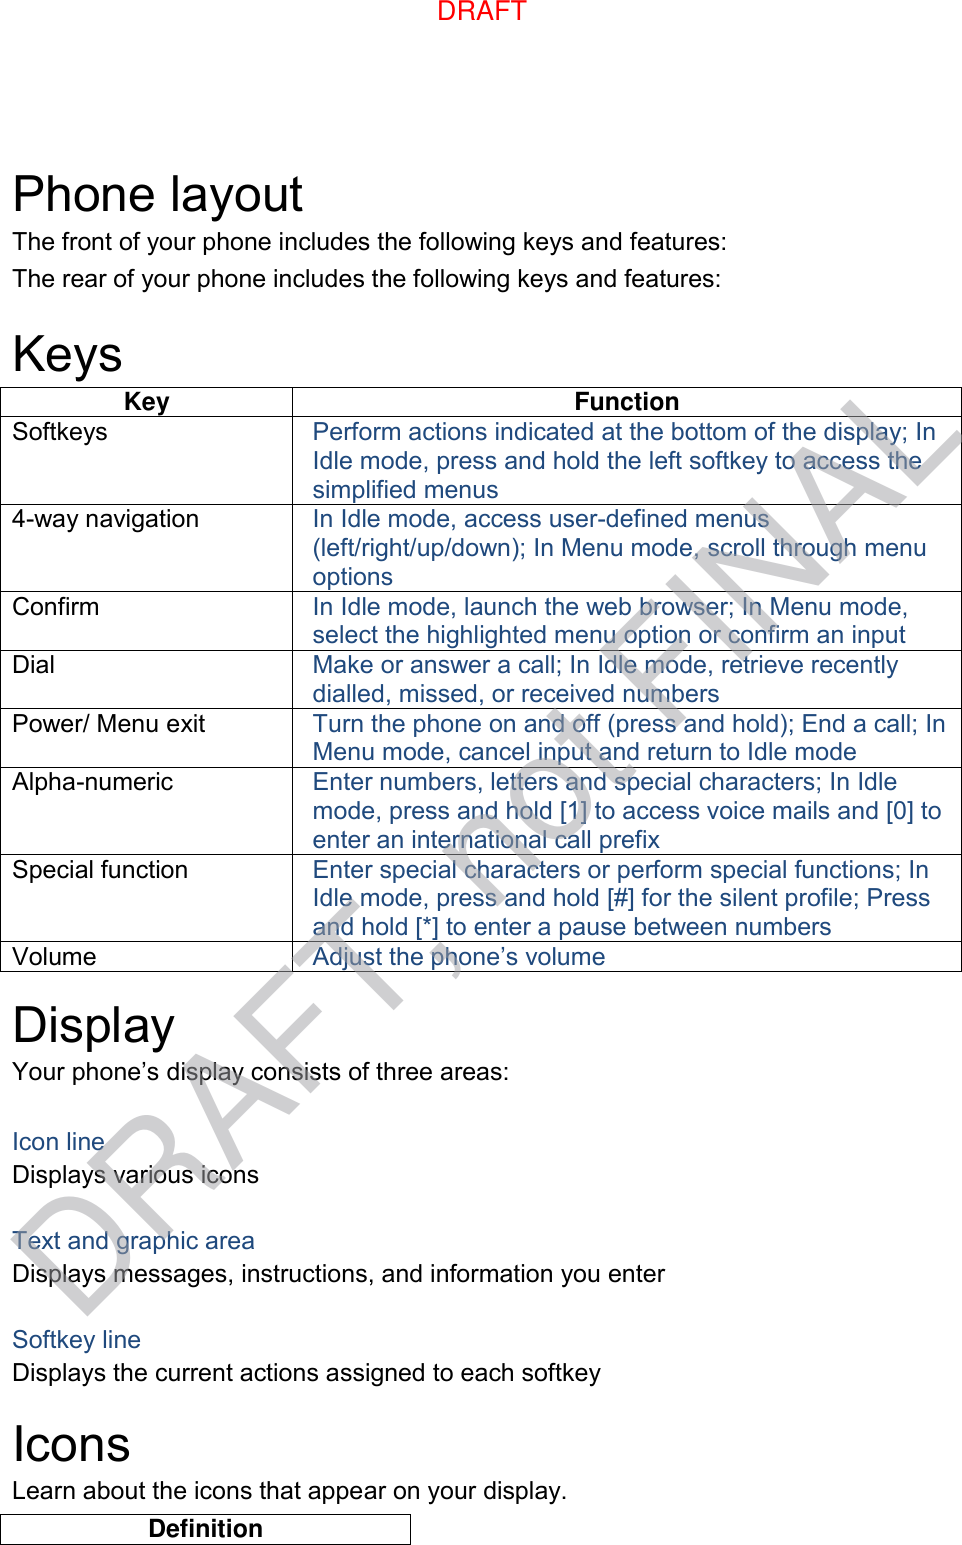  Phone layout The front of your phone includes the following keys and features: The rear of your phone includes the following keys and features:  Keys Key Function Softkeys Perform actions indicated at the bottom of the display; In Idle mode, press and hold the left softkey to access the simplified menus 4-way navigation In Idle mode, access user-defined menus (left/right/up/down); In Menu mode, scroll through menu options Confirm In Idle mode, launch the web browser; In Menu mode, select the highlighted menu option or confirm an input Dial Make or answer a call; In Idle mode, retrieve recently dialled, missed, or received numbers Power/ Menu exit Turn the phone on and off (press and hold); End a call; In Menu mode, cancel input and return to Idle mode Alpha-numeric Enter numbers, letters and special characters; In Idle mode, press and hold [1] to access voice mails and [0] to enter an international call prefix Special function Enter special characters or perform special functions; In Idle mode, press and hold [#] for the silent profile; Press and hold [*] to enter a pause between numbers Volume Adjust the phone’s volume  Display Your phone’s display consists of three areas:  Icon line Displays various icons  Text and graphic area Displays messages, instructions, and information you enter  Softkey line Displays the current actions assigned to each softkey  Icons Learn about the icons that appear on your display. Definition DRAFT, not FINALDRAFT